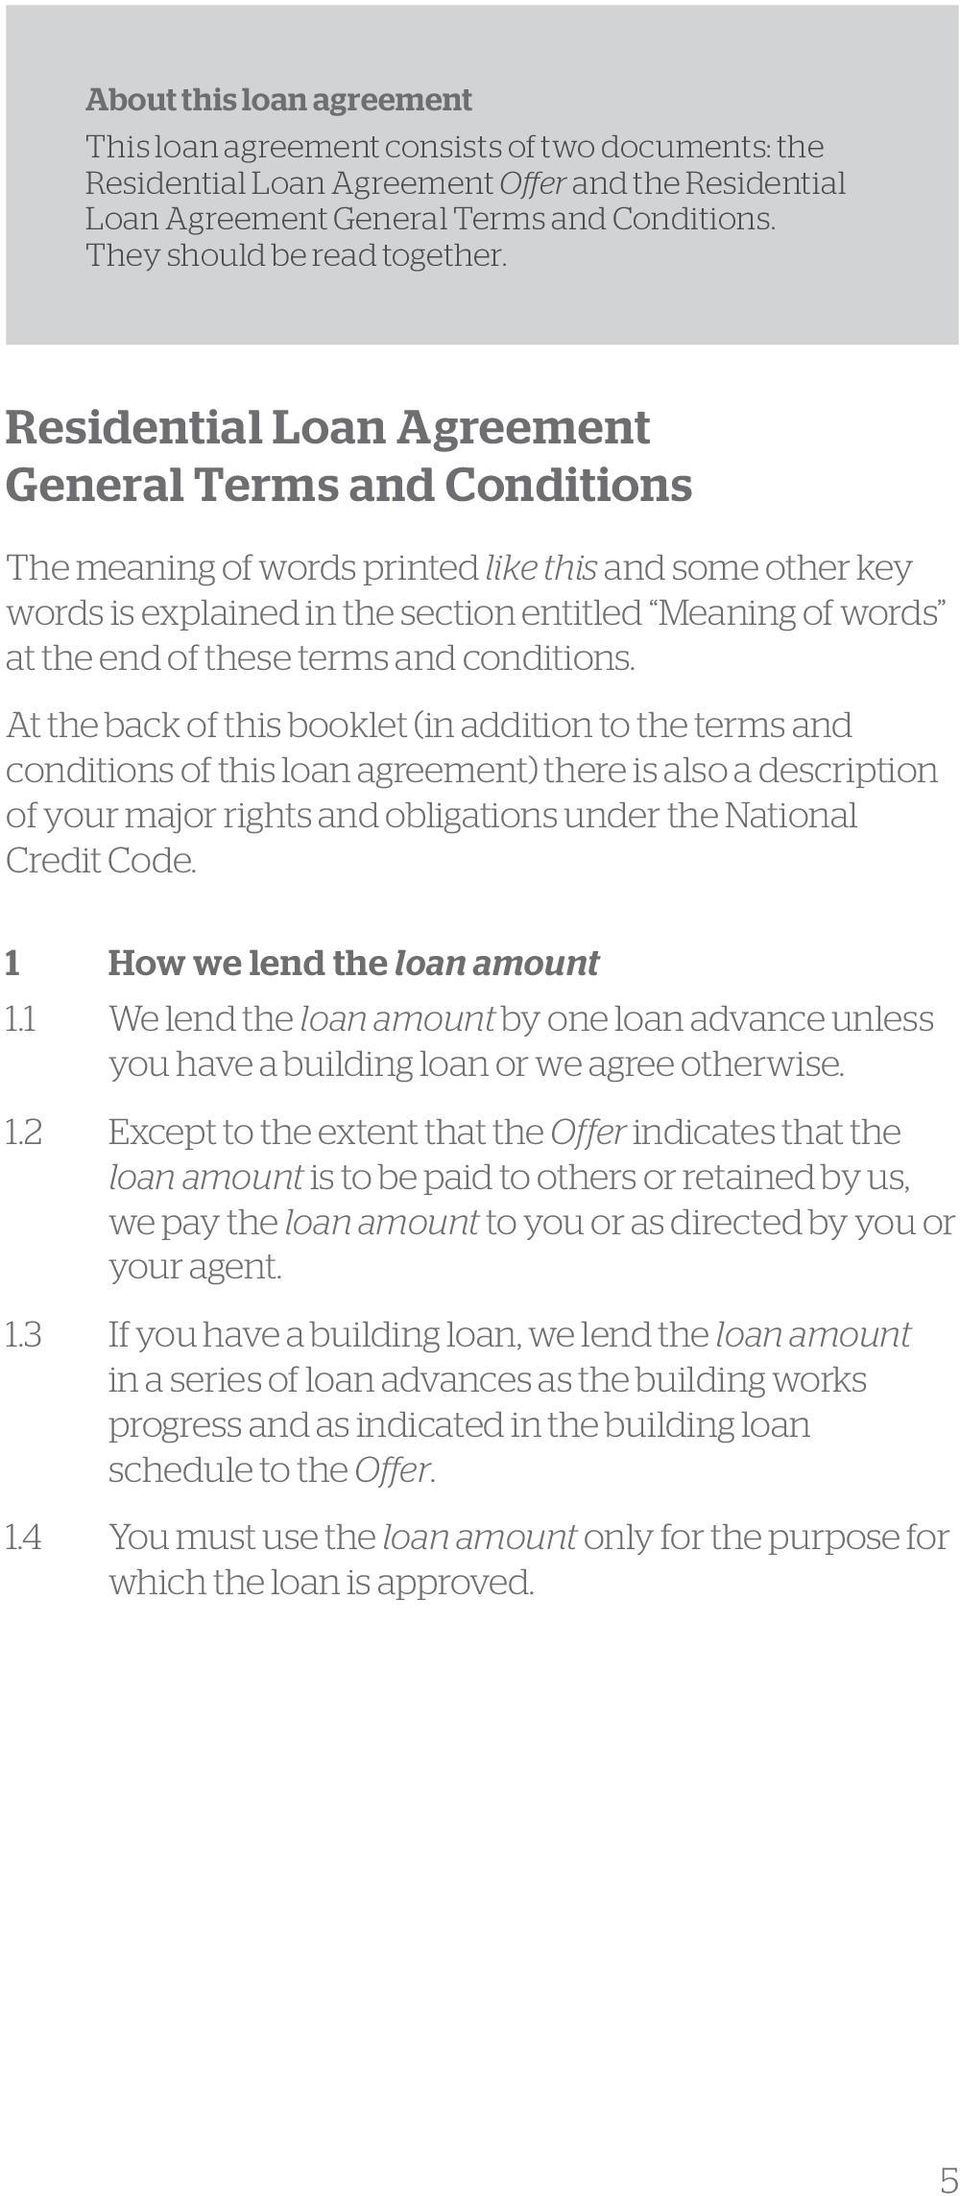 Residential Loan Agreement General Terms and Conditions The meaning of words printed like this and some other key words is explained in the section entitled Meaning of words at the end of these terms